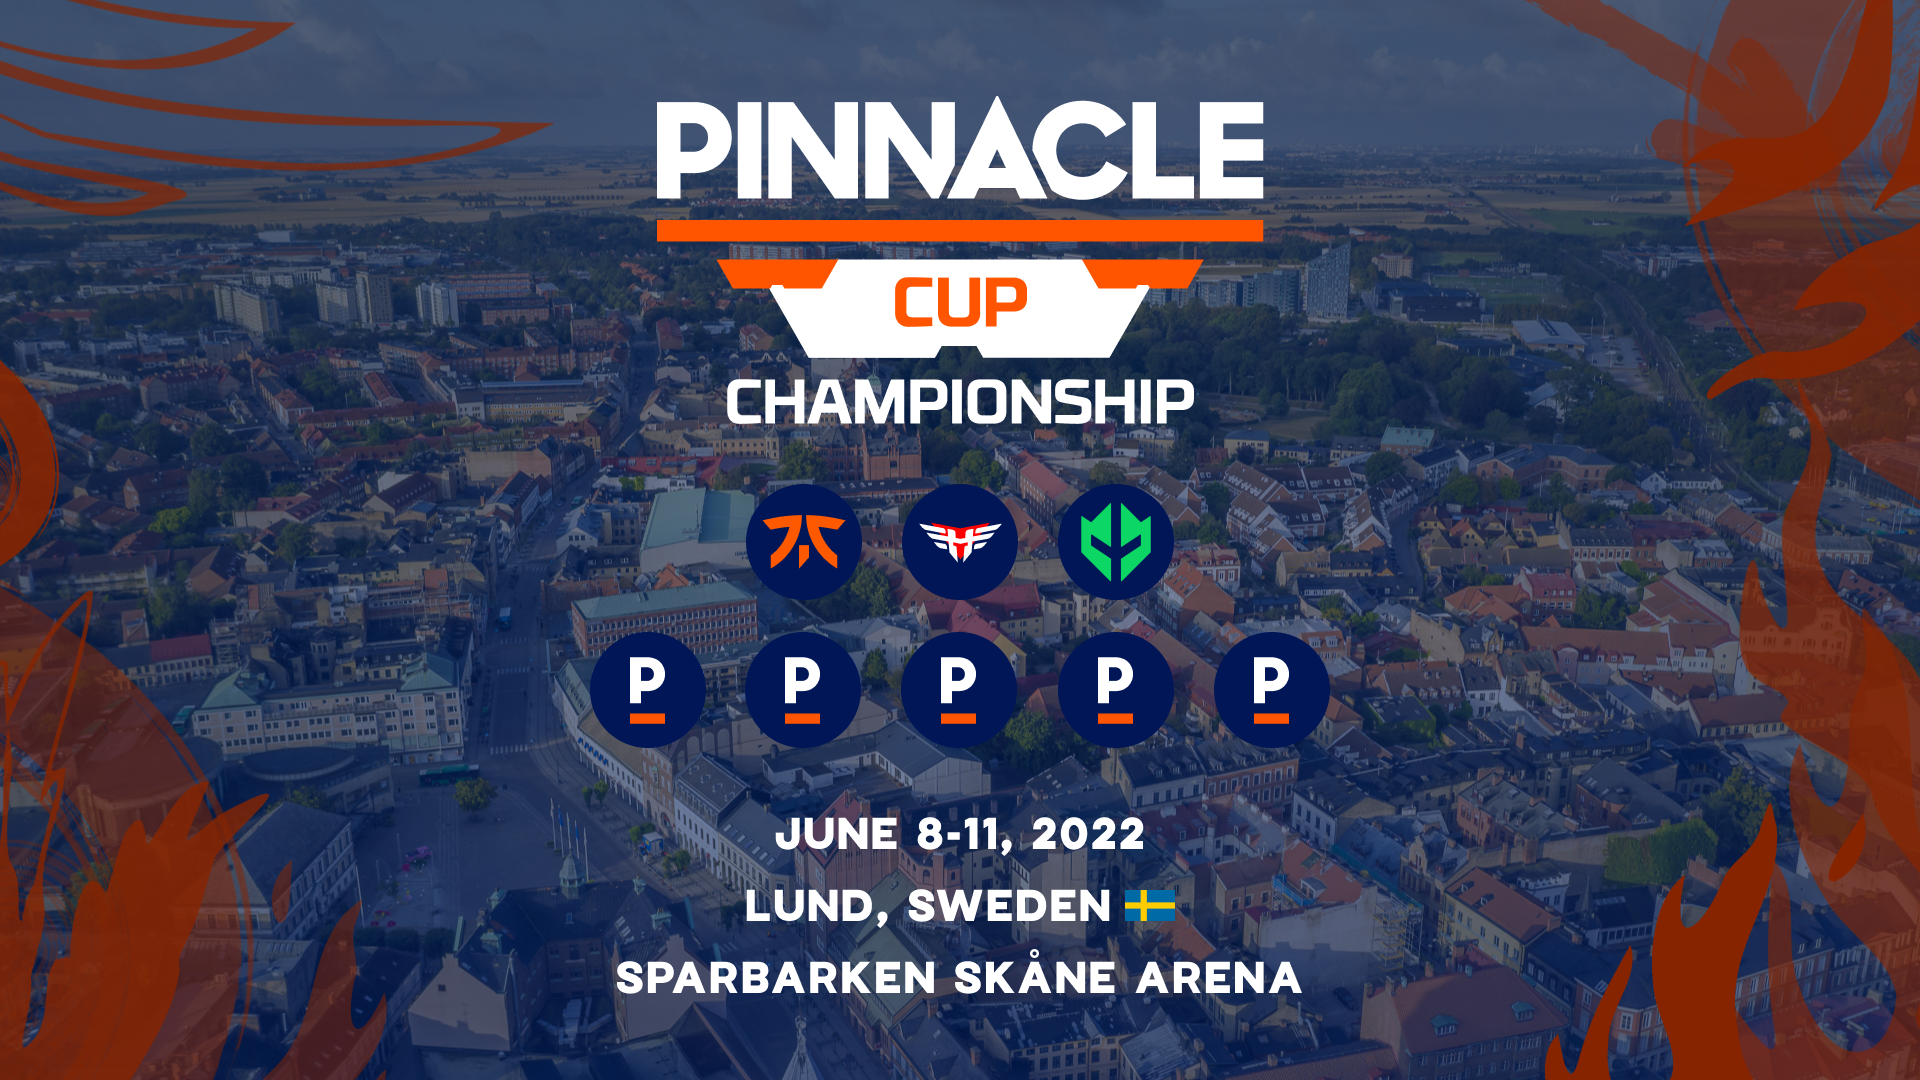 Announcing the Pinnacle Cup Championship 